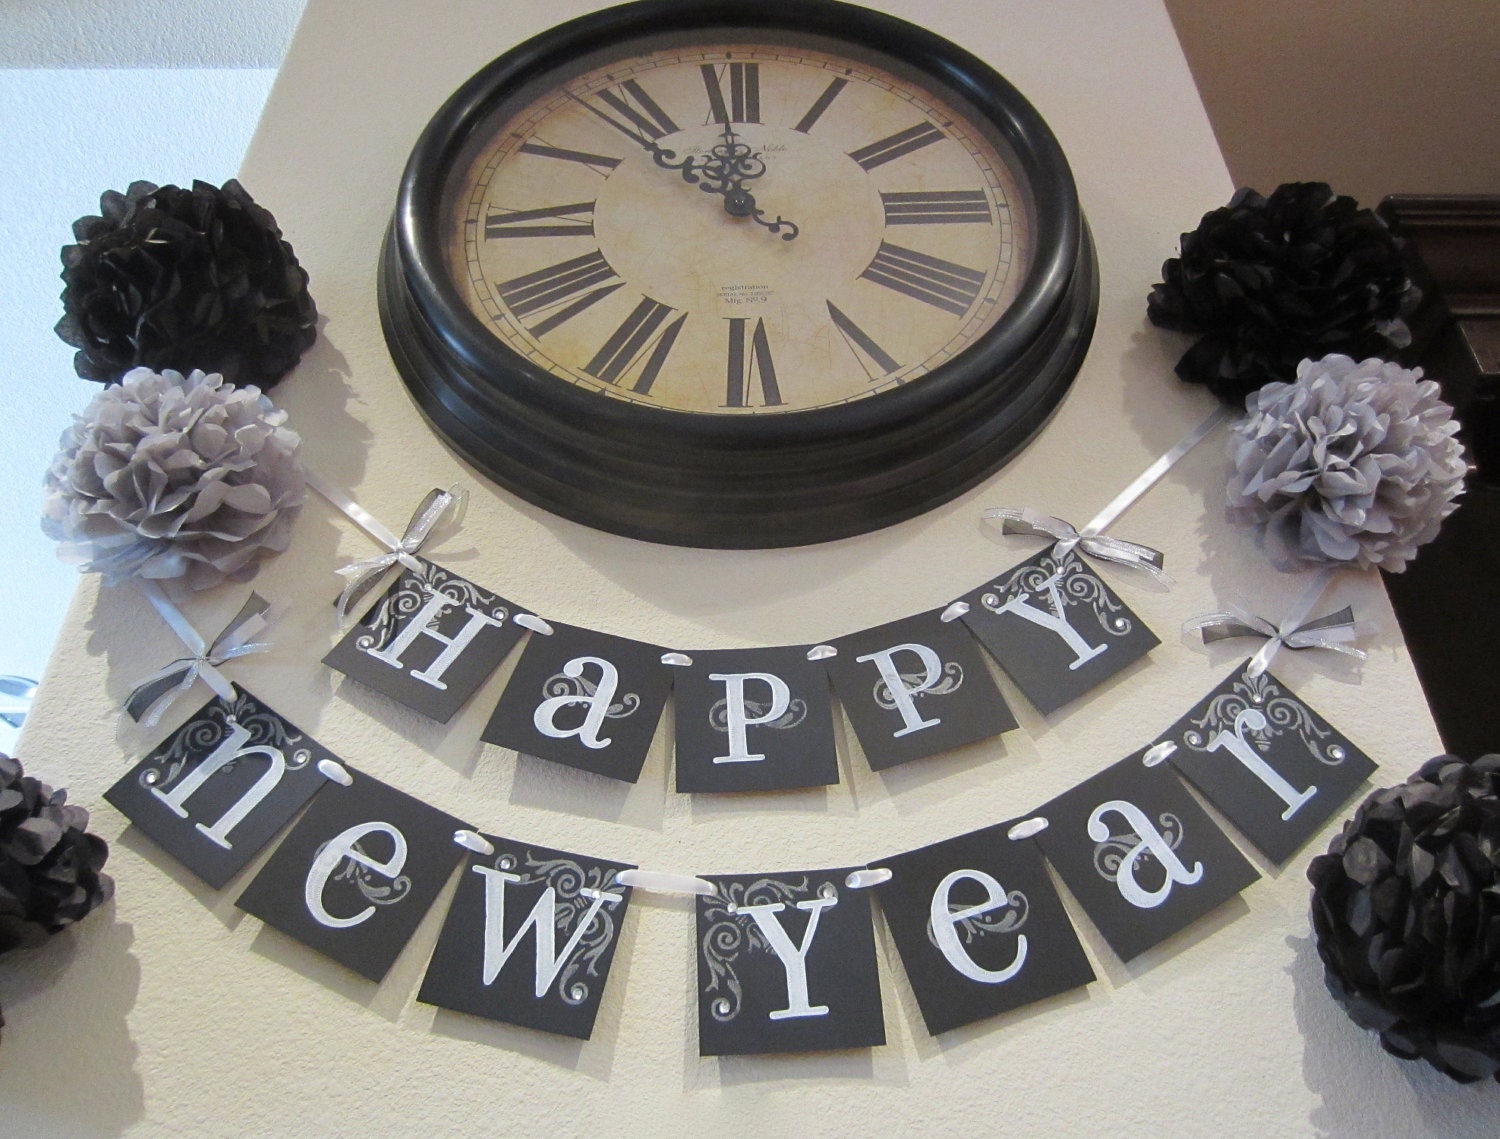 Happy New Year 2012 banner garland decoration wall hanging black and white